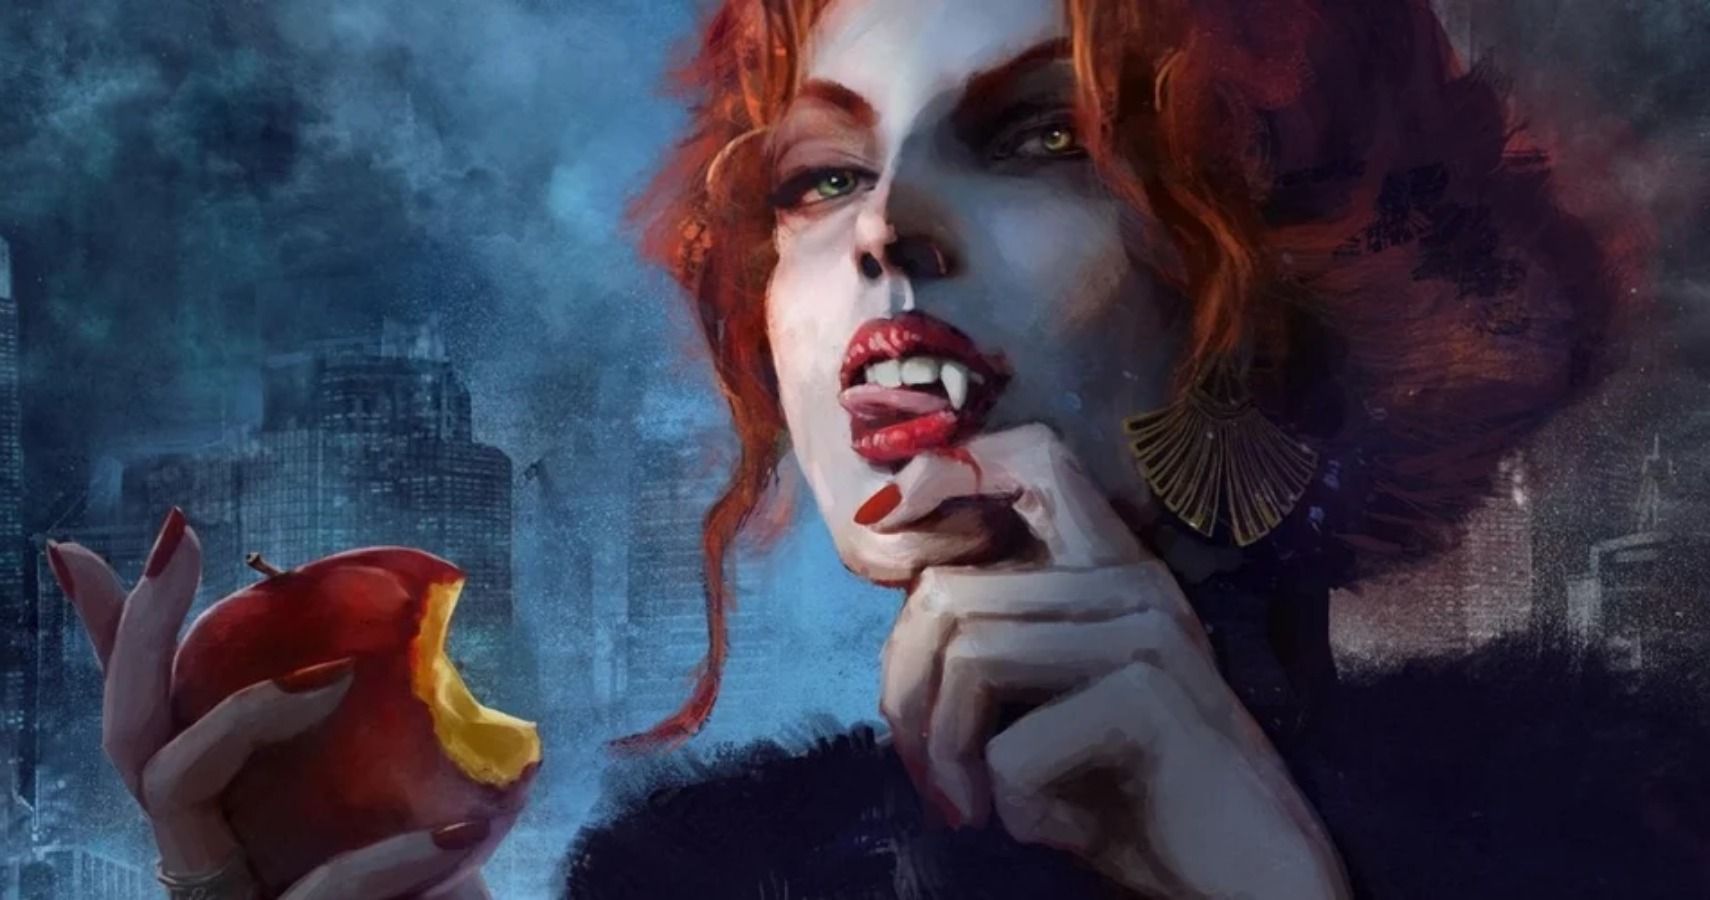 Vampire: the Masquerade - Coteries of New York review